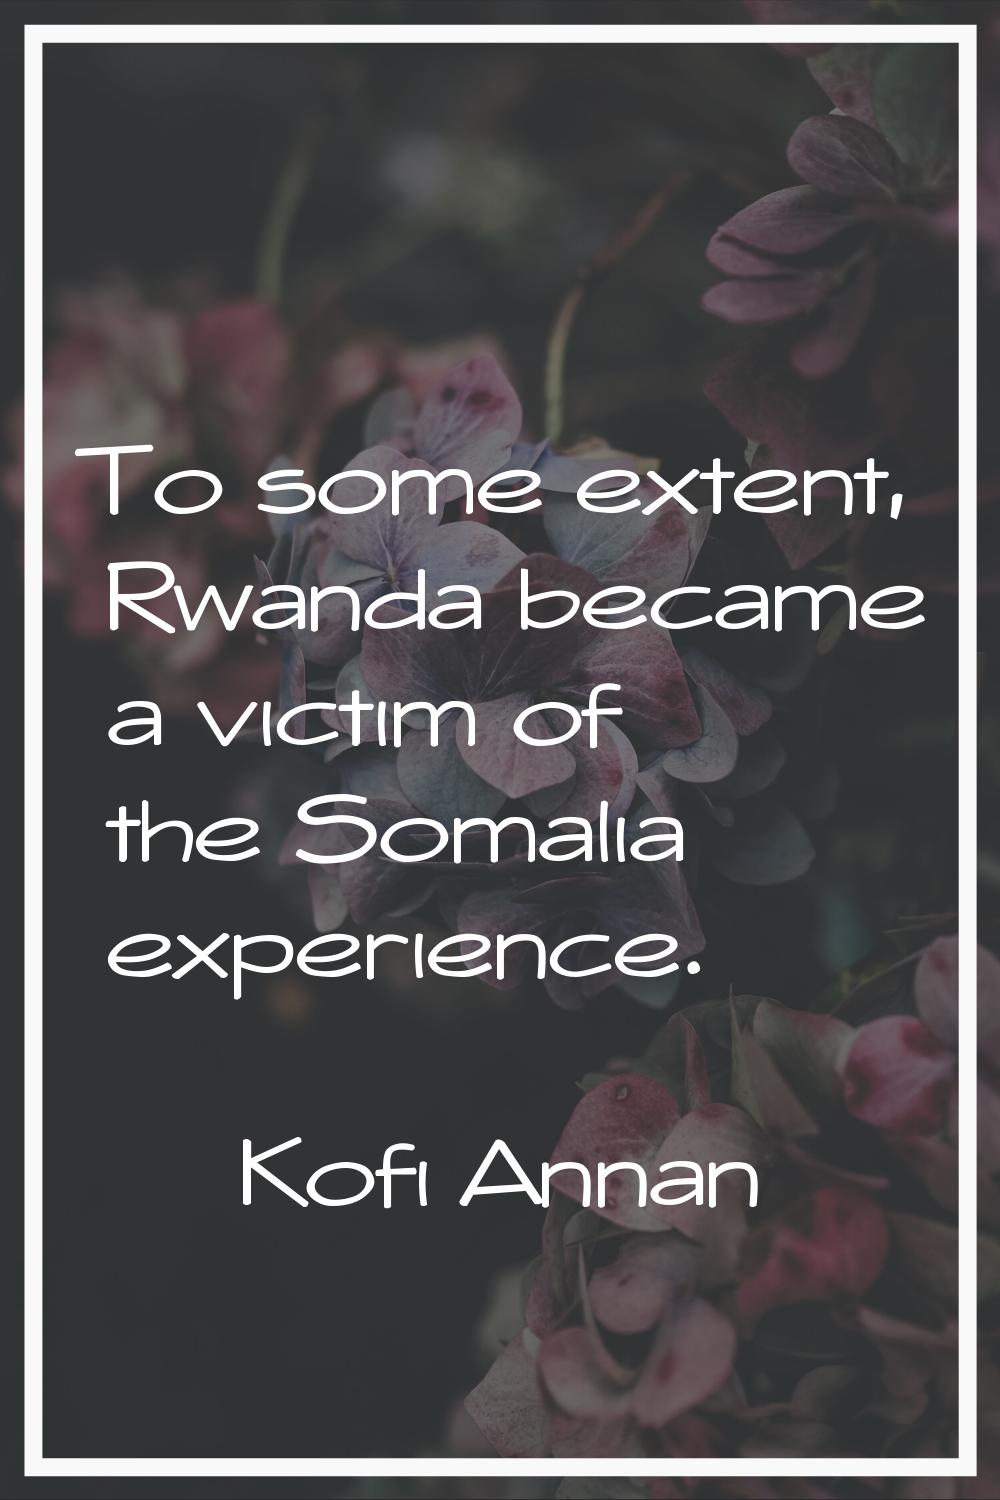 To some extent, Rwanda became a victim of the Somalia experience.